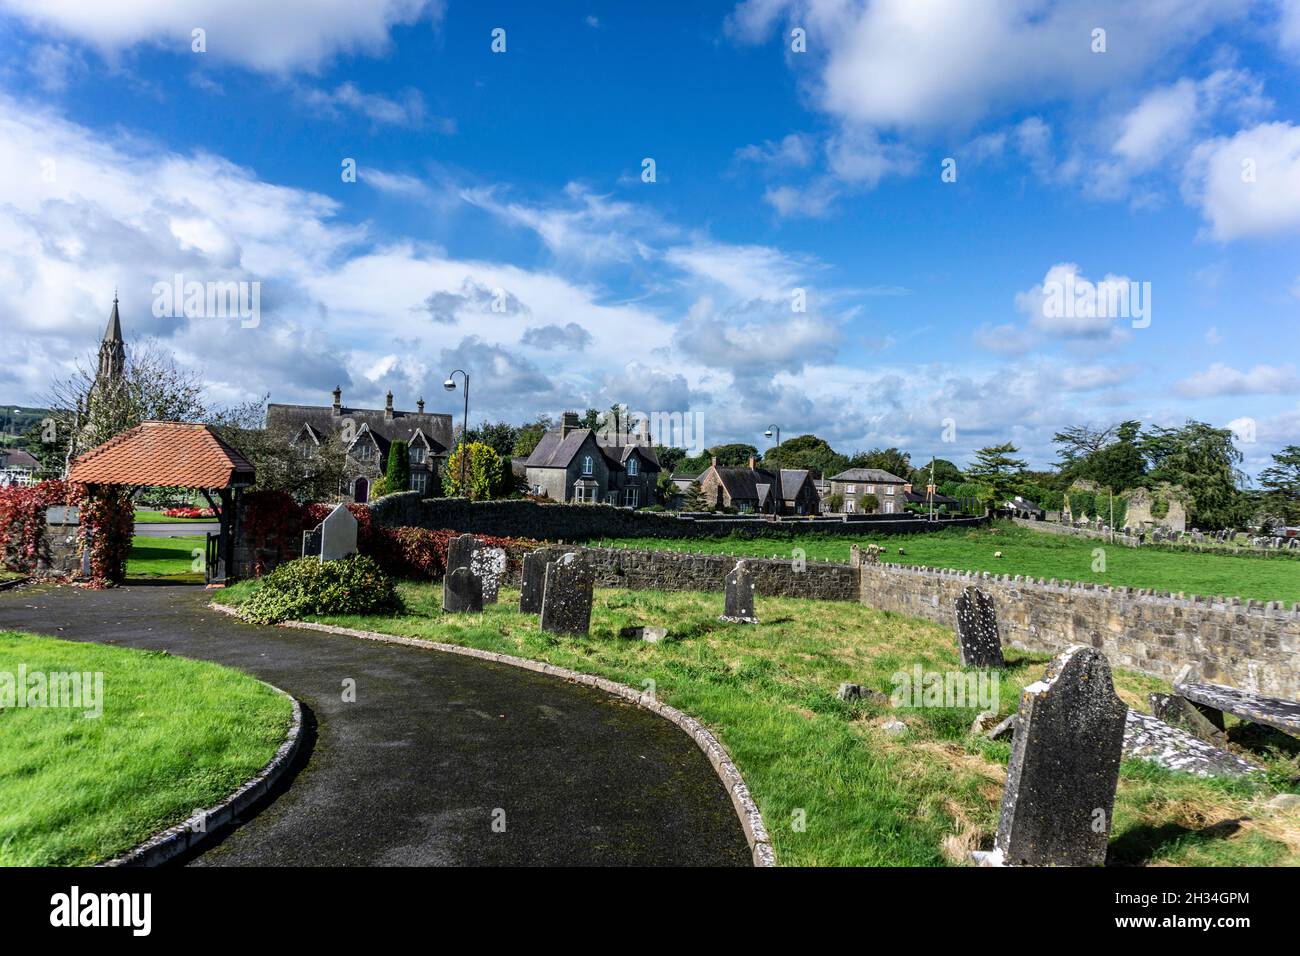 Ardagh village in Longford, Ireland. In the 19th century the small village was built in a Swiss style by the then landlords-the Fetherston family. Stock Photo